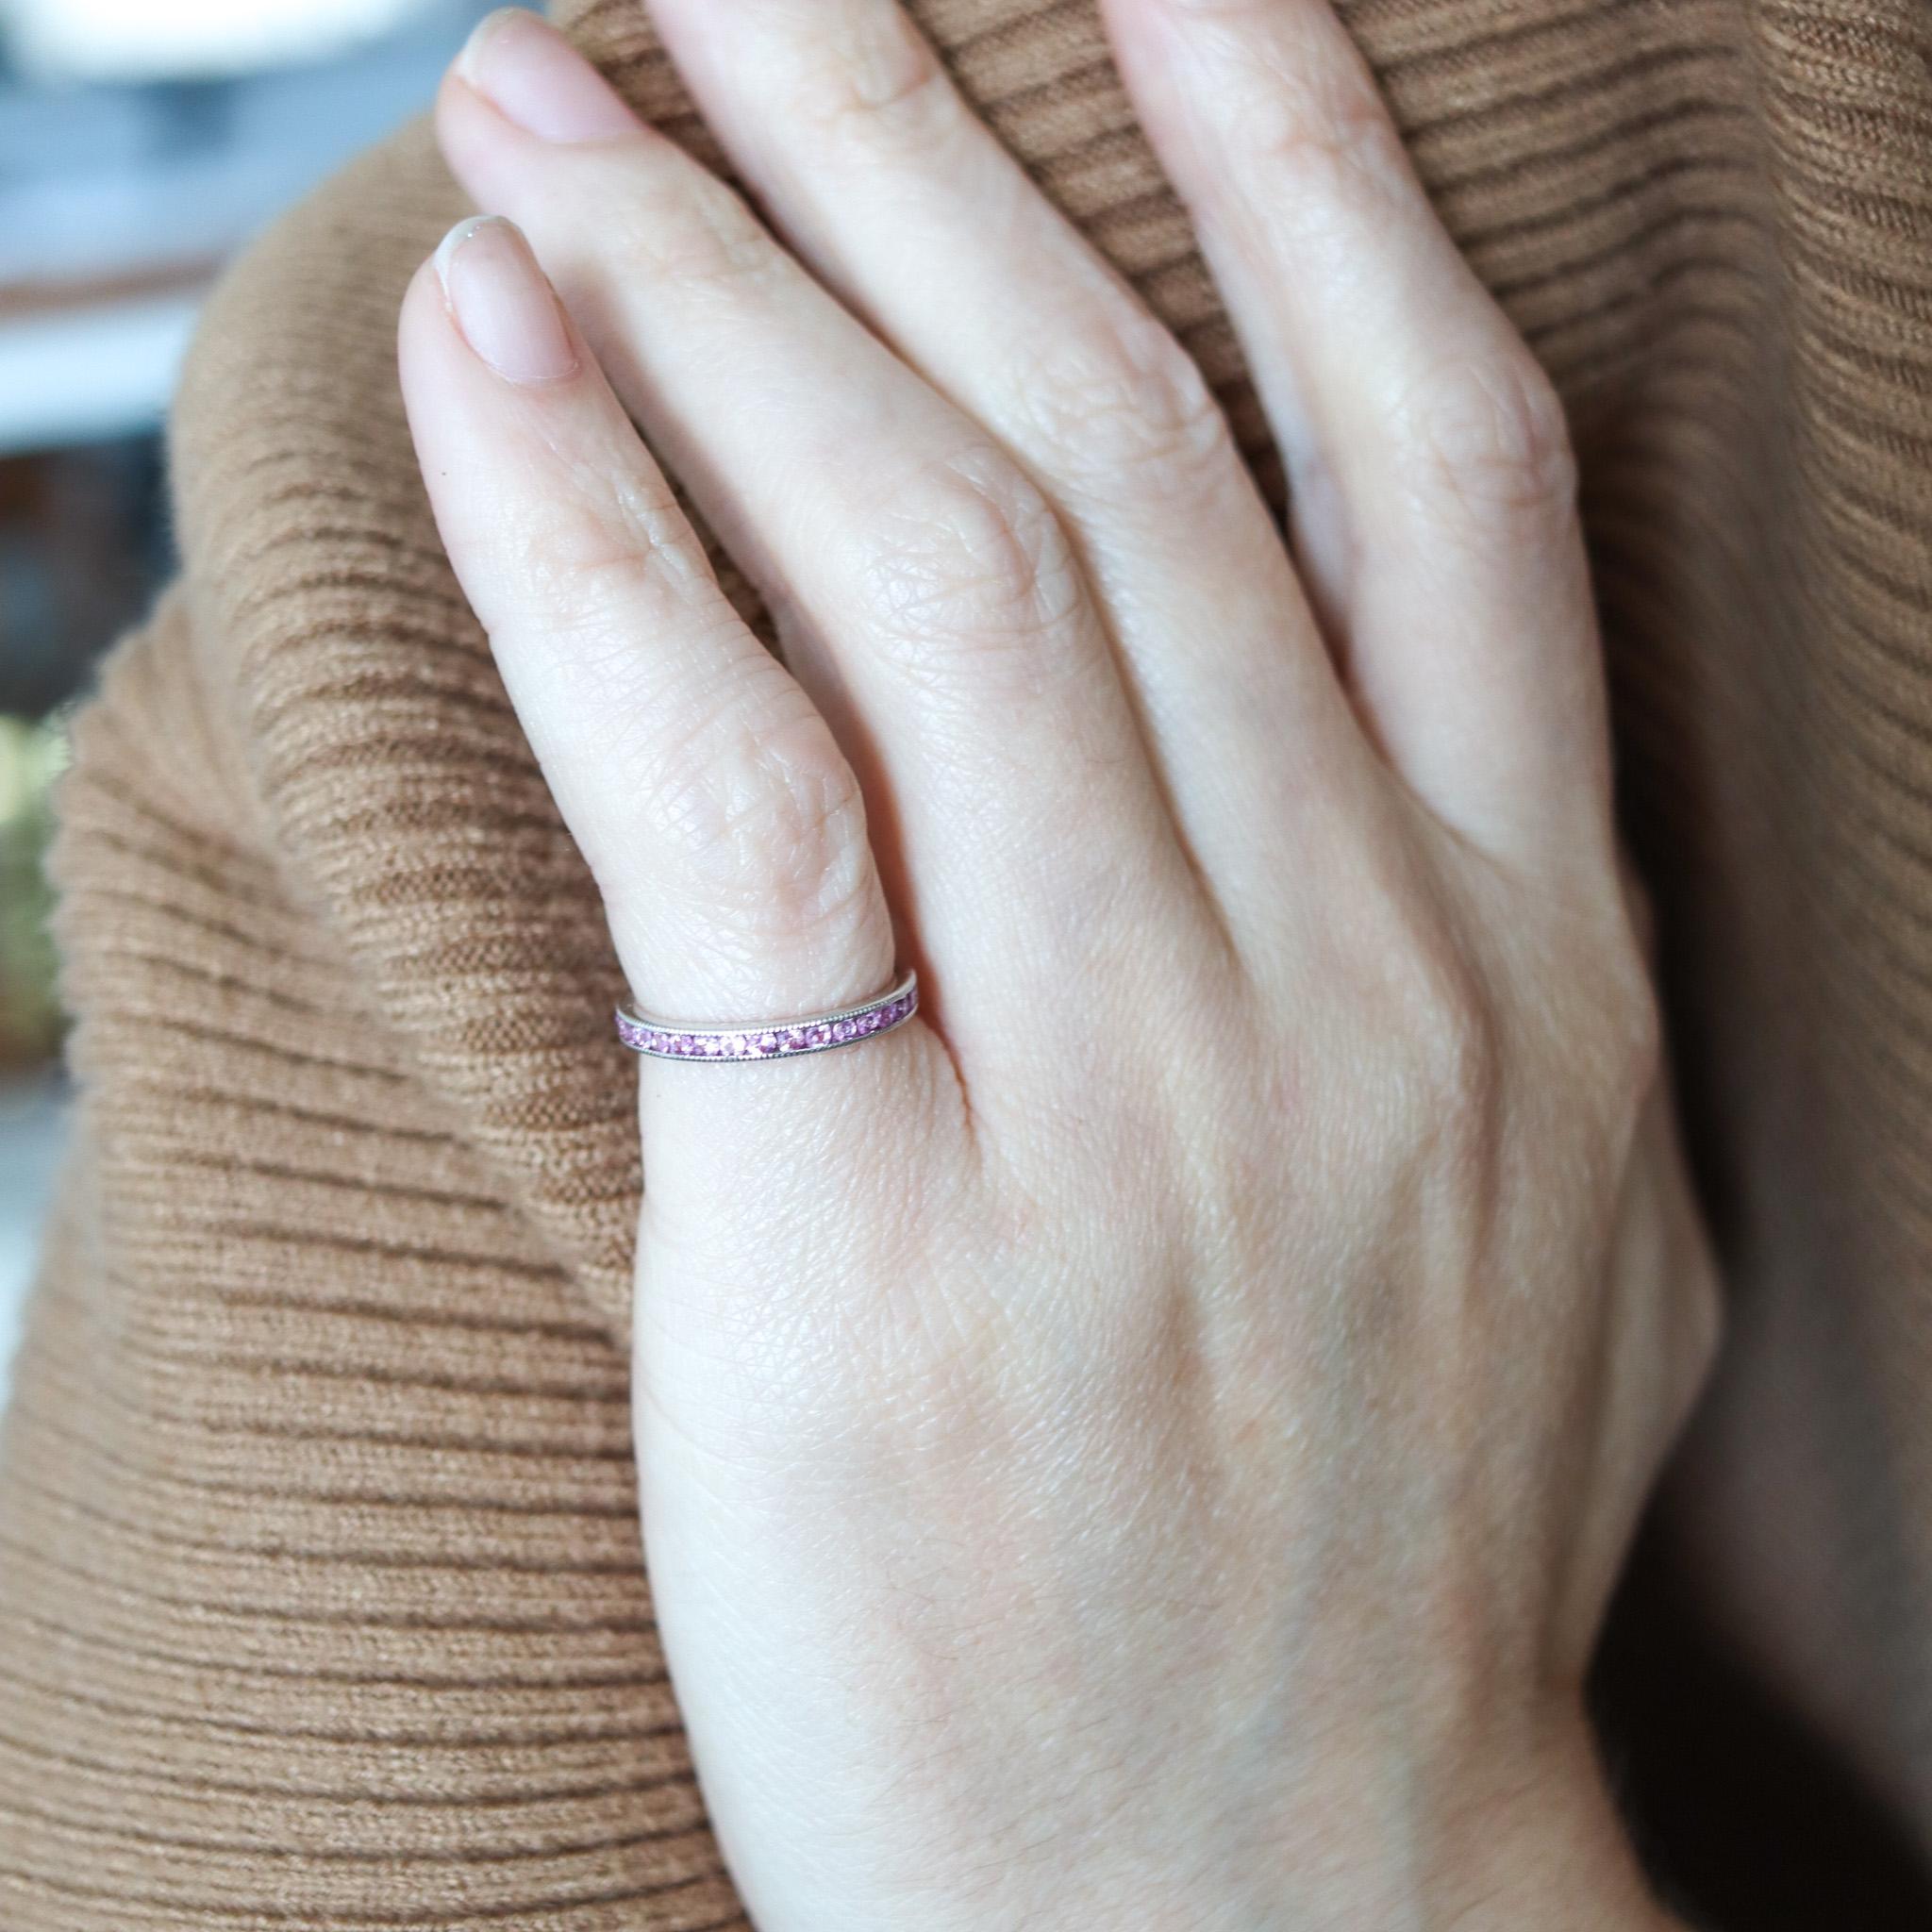 An eternity ring band with natural pink sapphires.

Contemporary eternity band ring crafted in America in solid white gold of 18 karats with high polished finish. It is mounted in a plain channel setting with 35 calibrated round brilliant cuts of